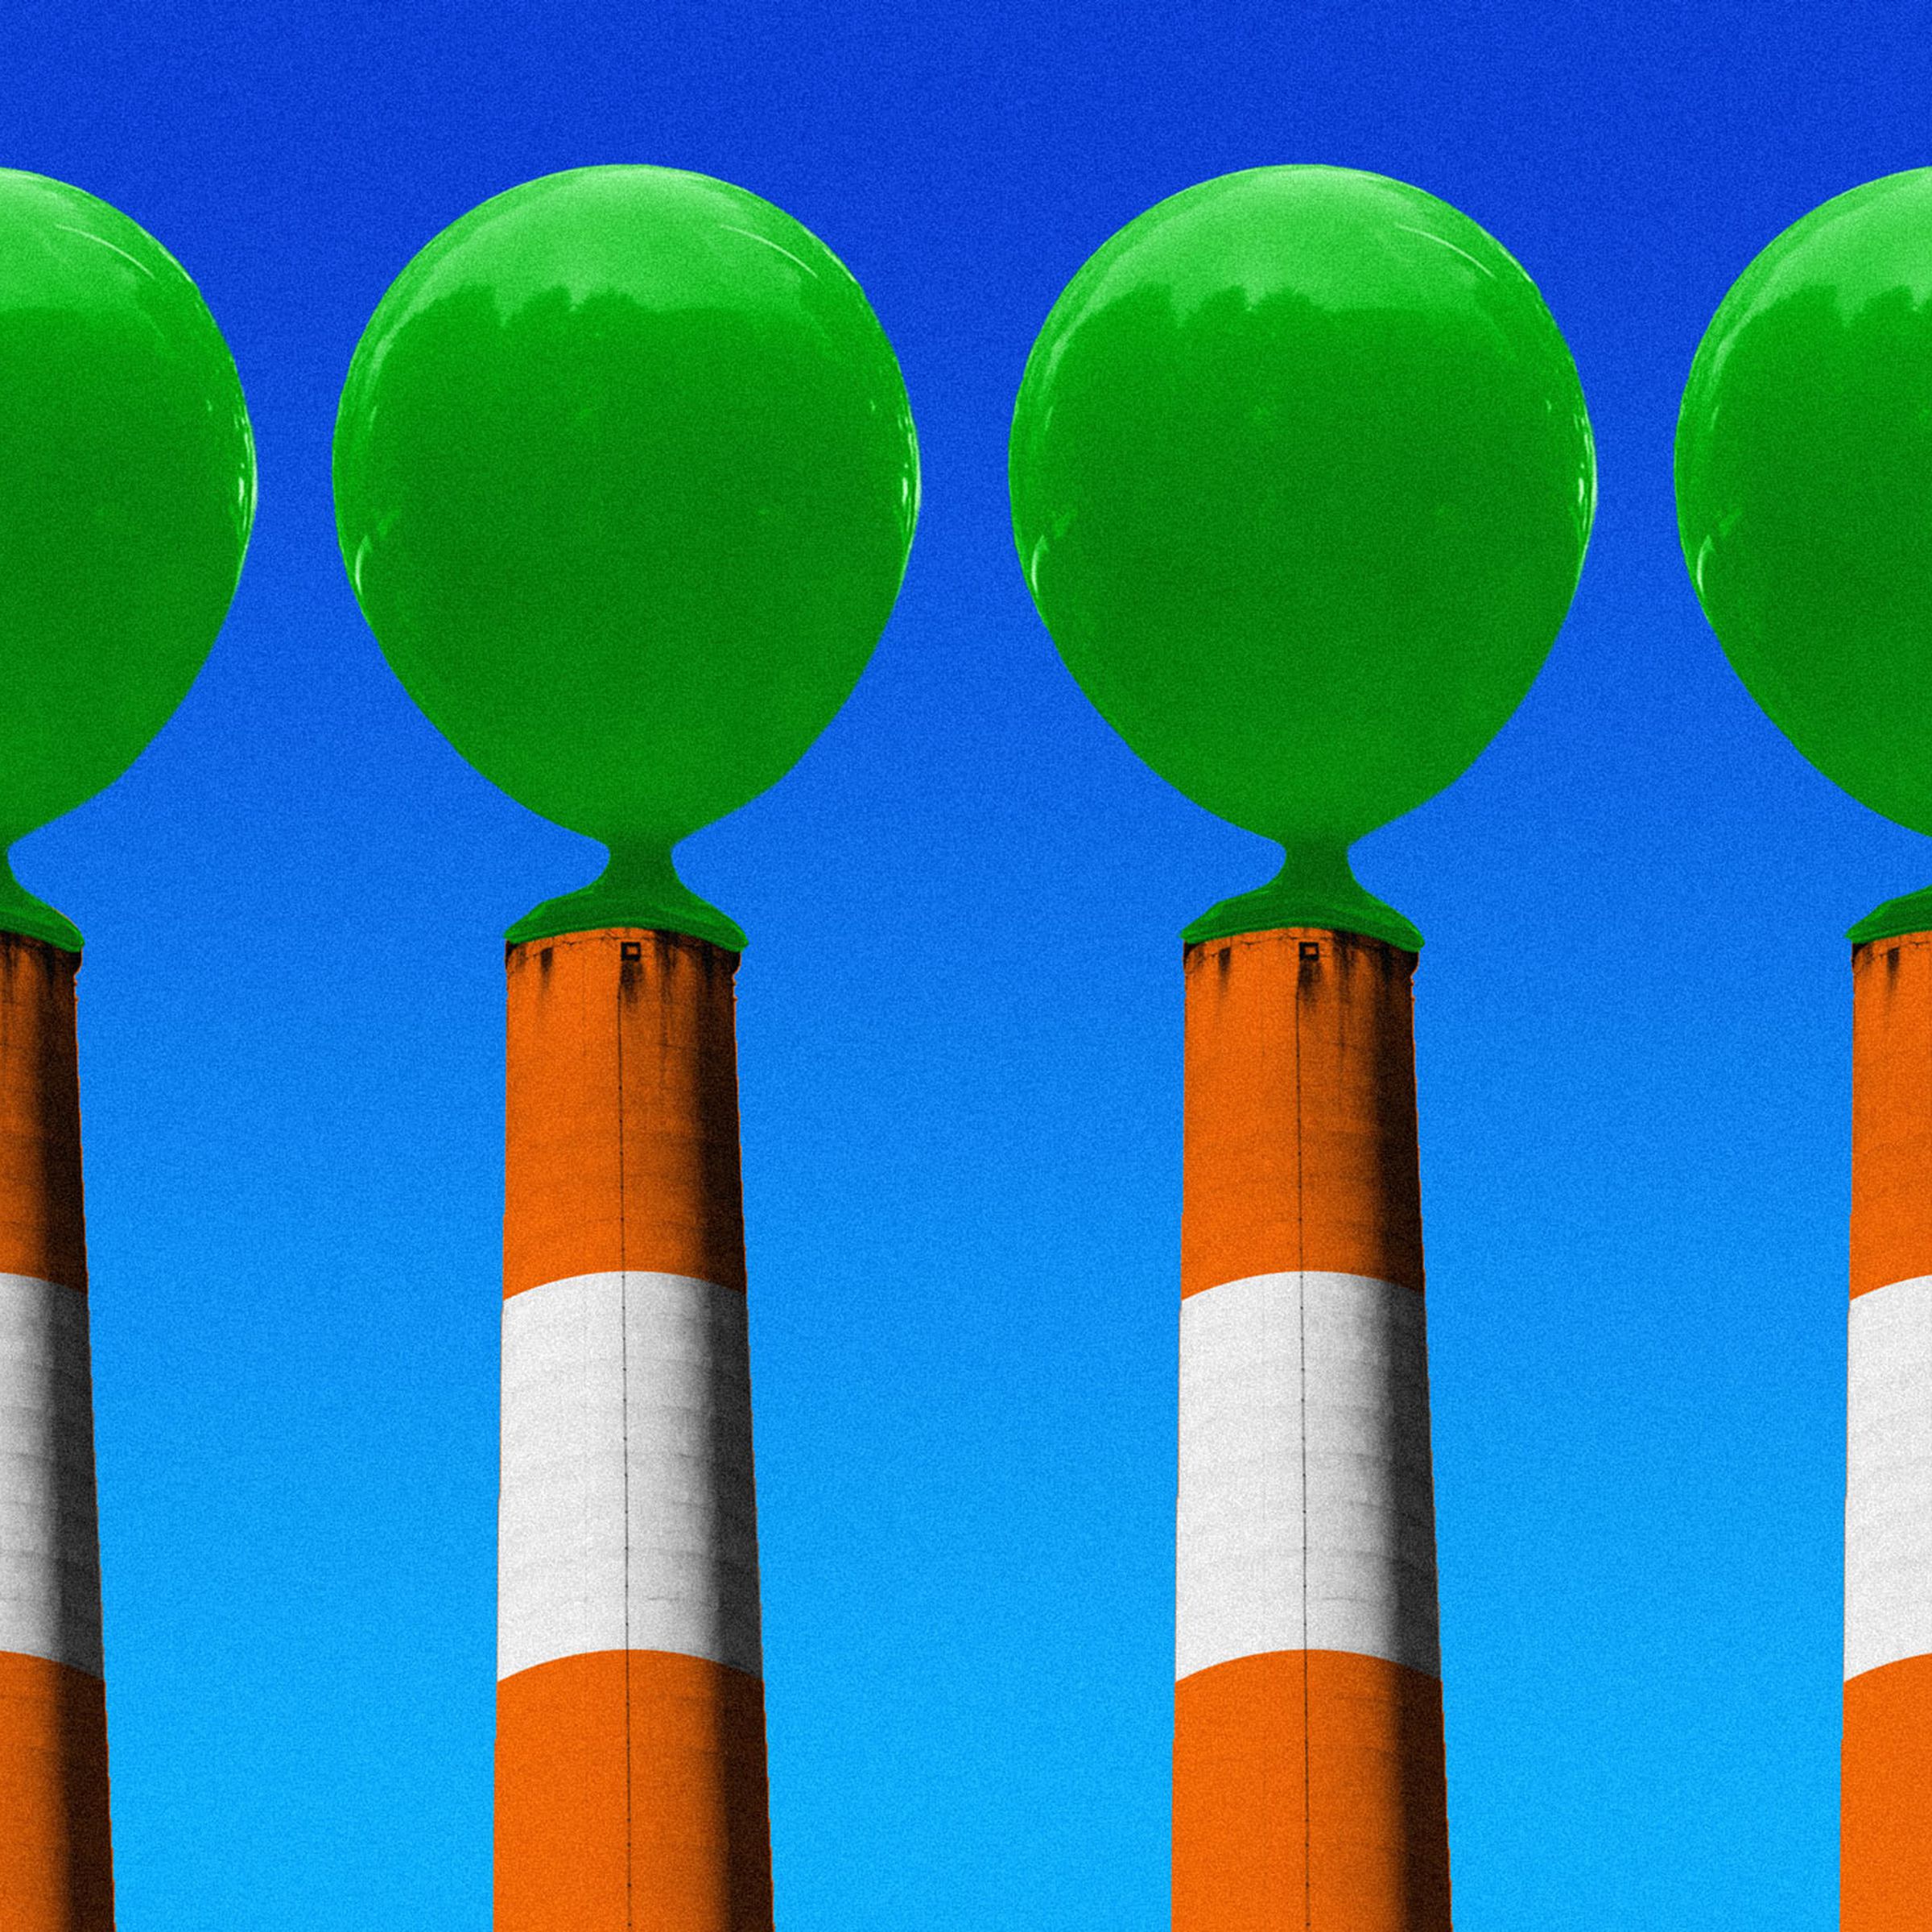 Art depicts cartoon balloons attached to the tops of four smokestacks.